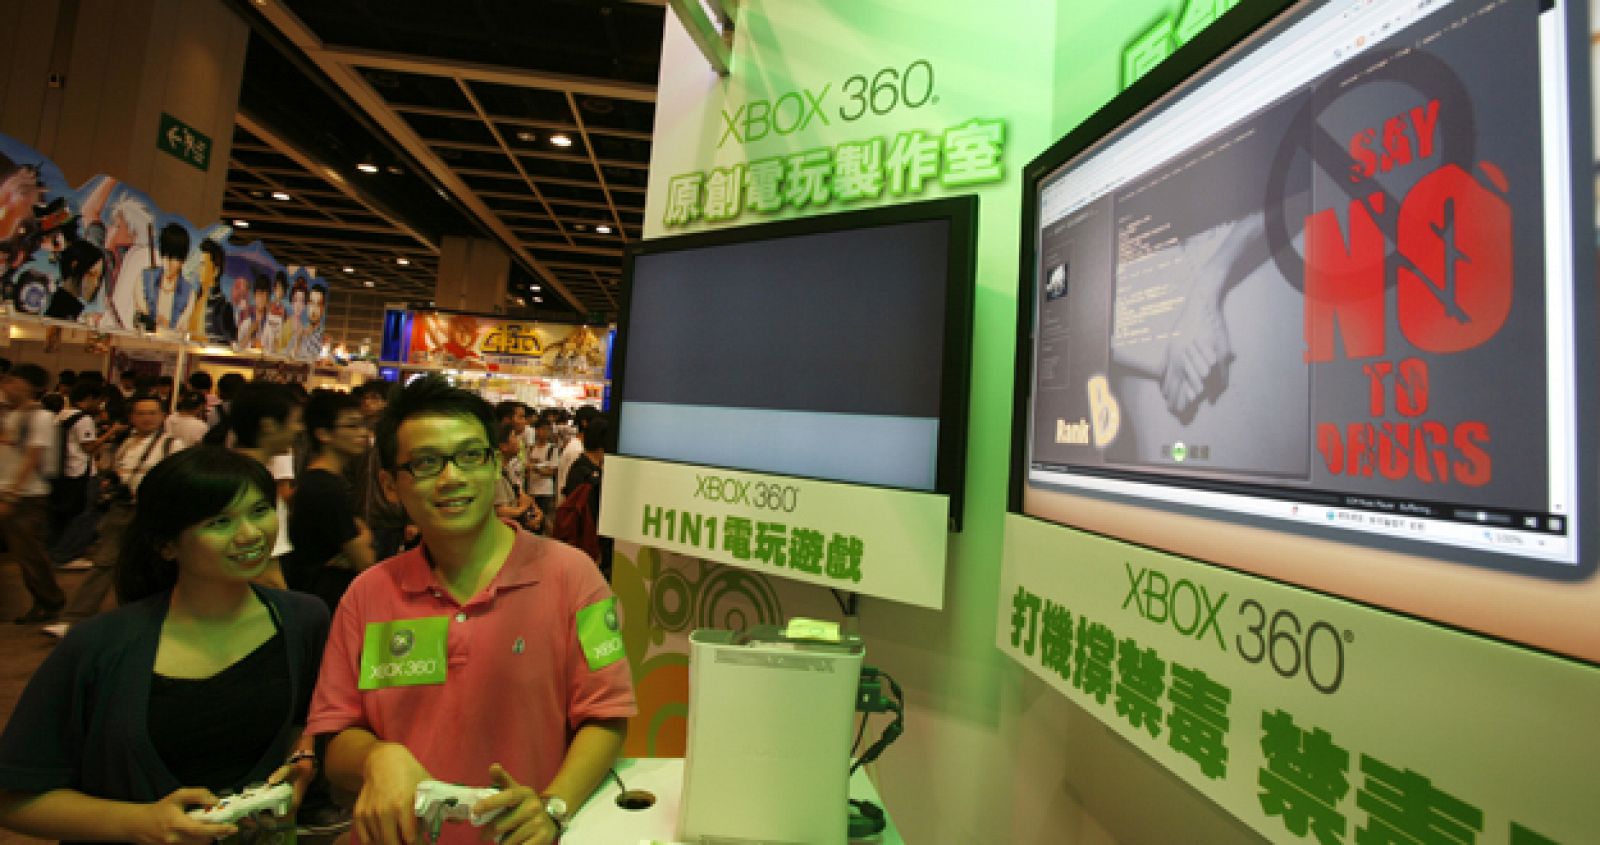 Staff at an Xbox booth demonstrate a anti-drug game during the annual Ani-Com & Games, a game and comic expo, in Hong Kong